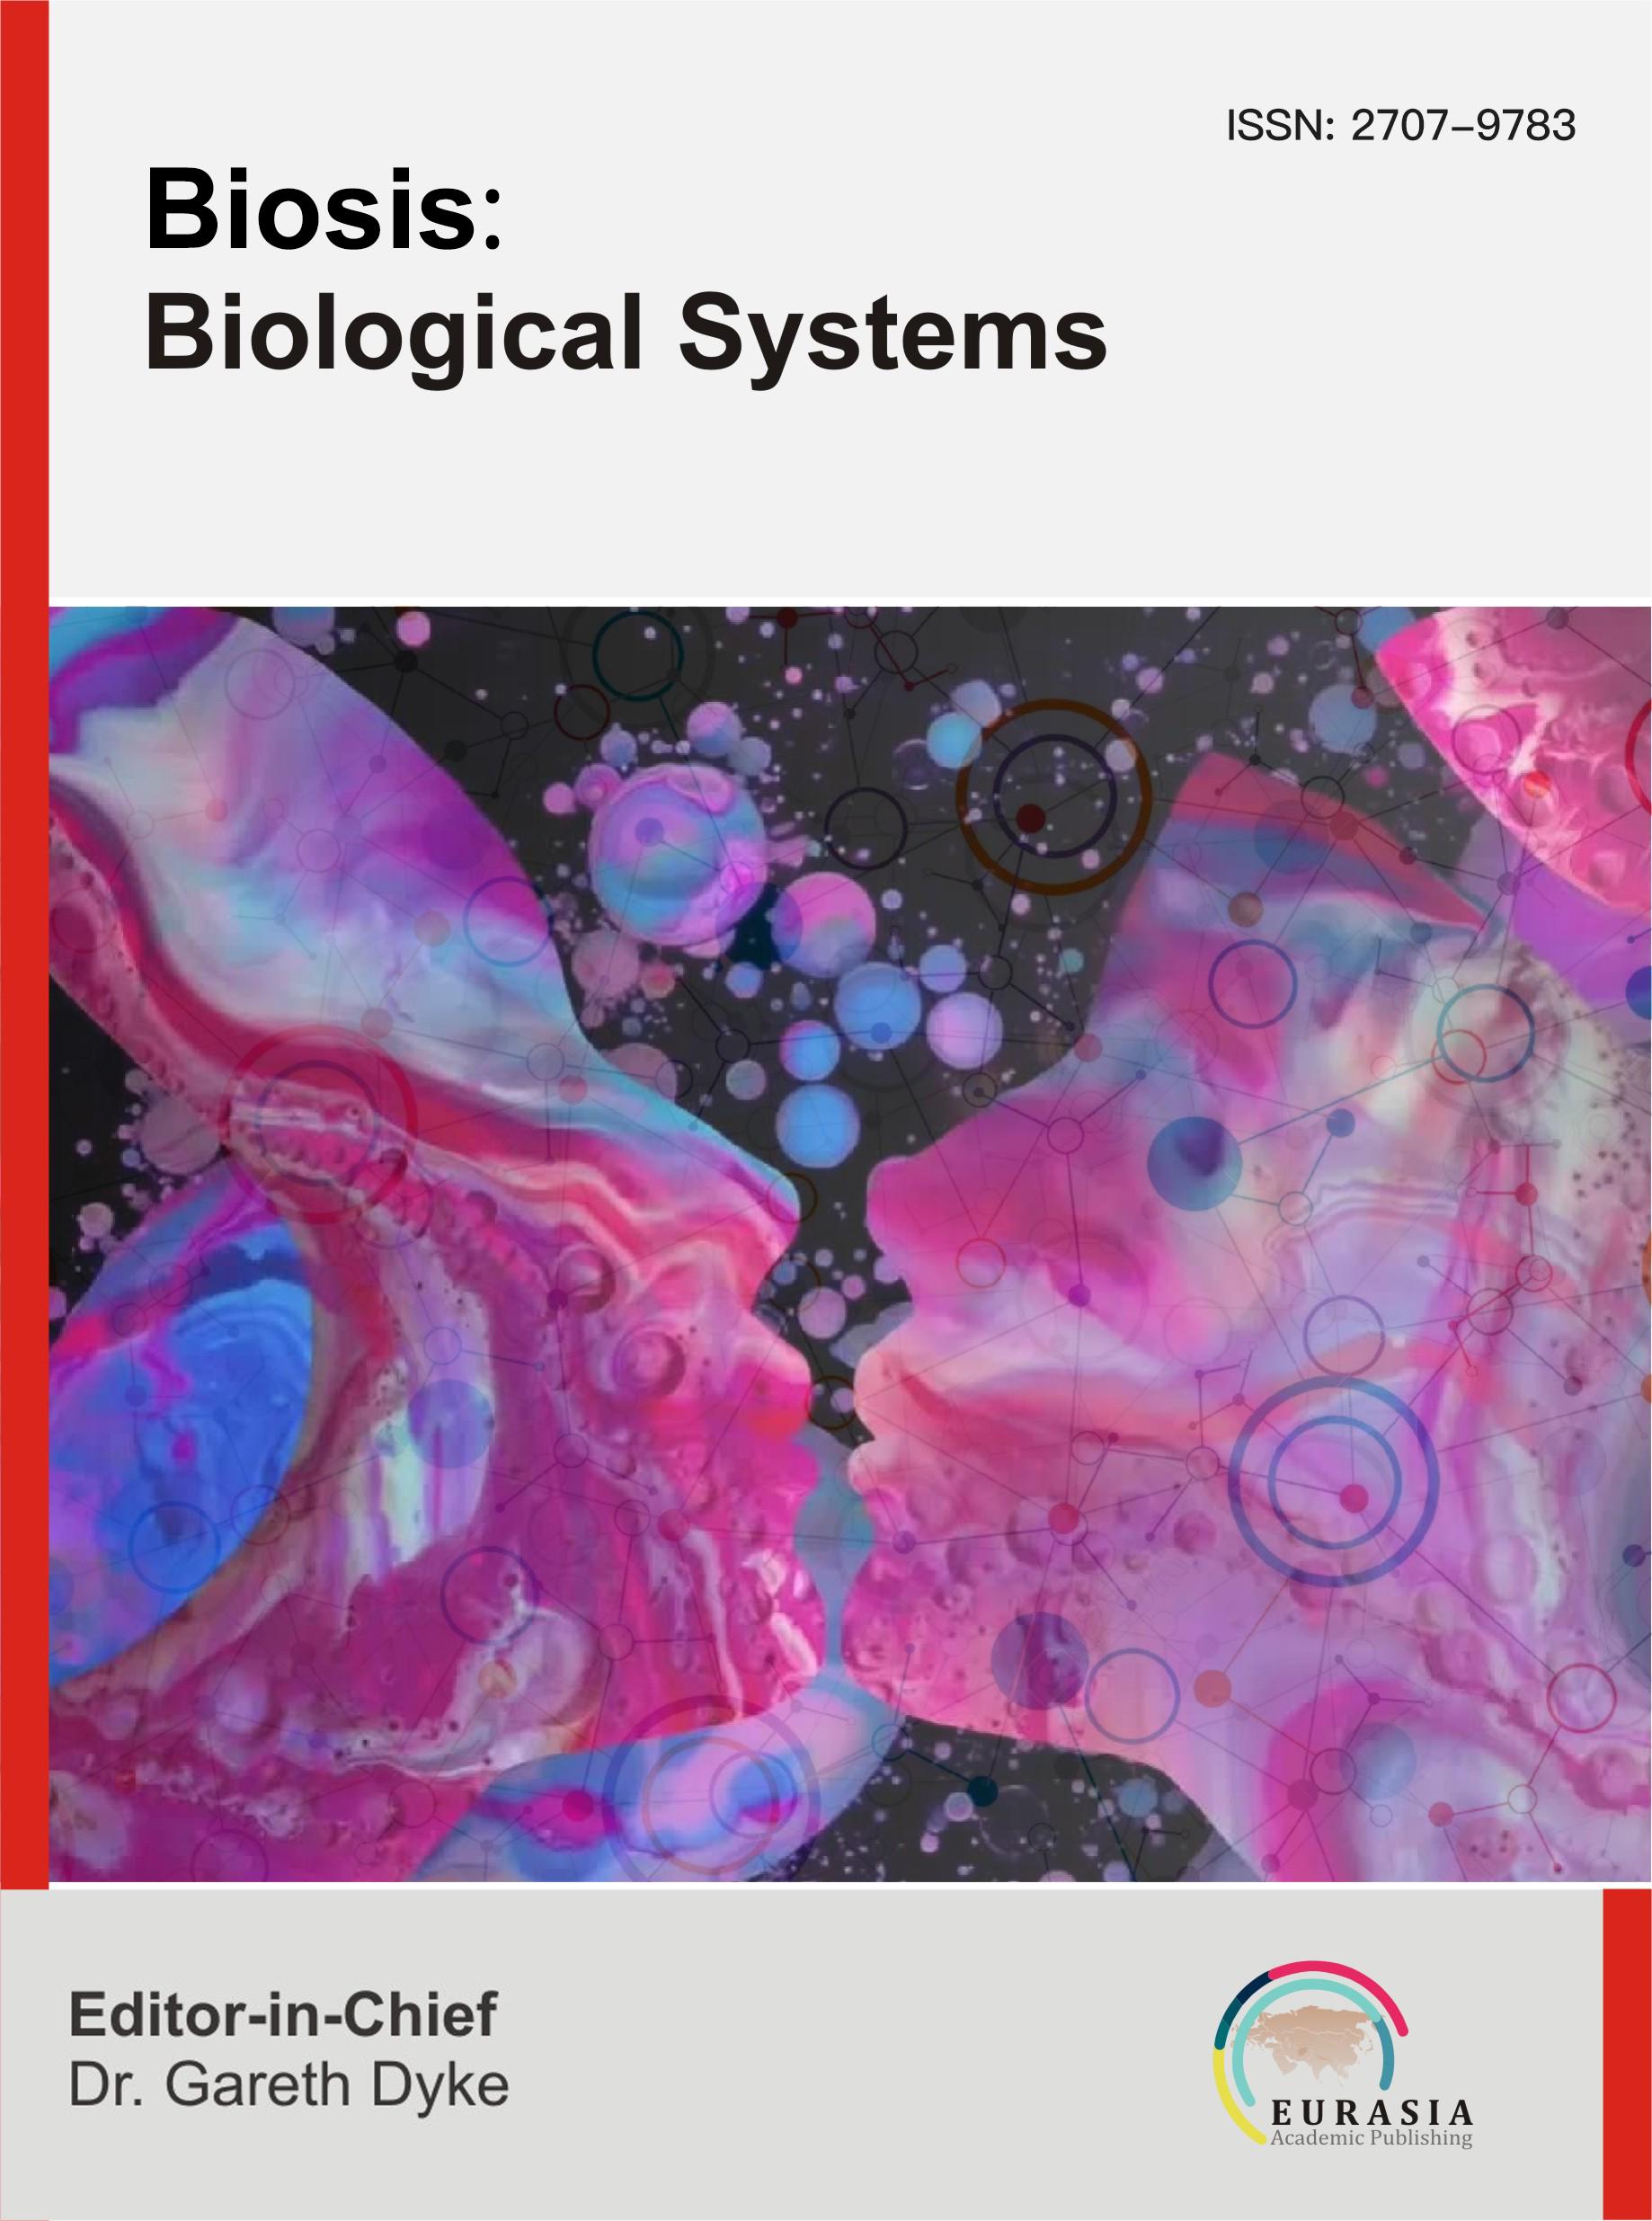 					View Vol. 3 No. 1 (2022): Biosis: Biological Systems
				